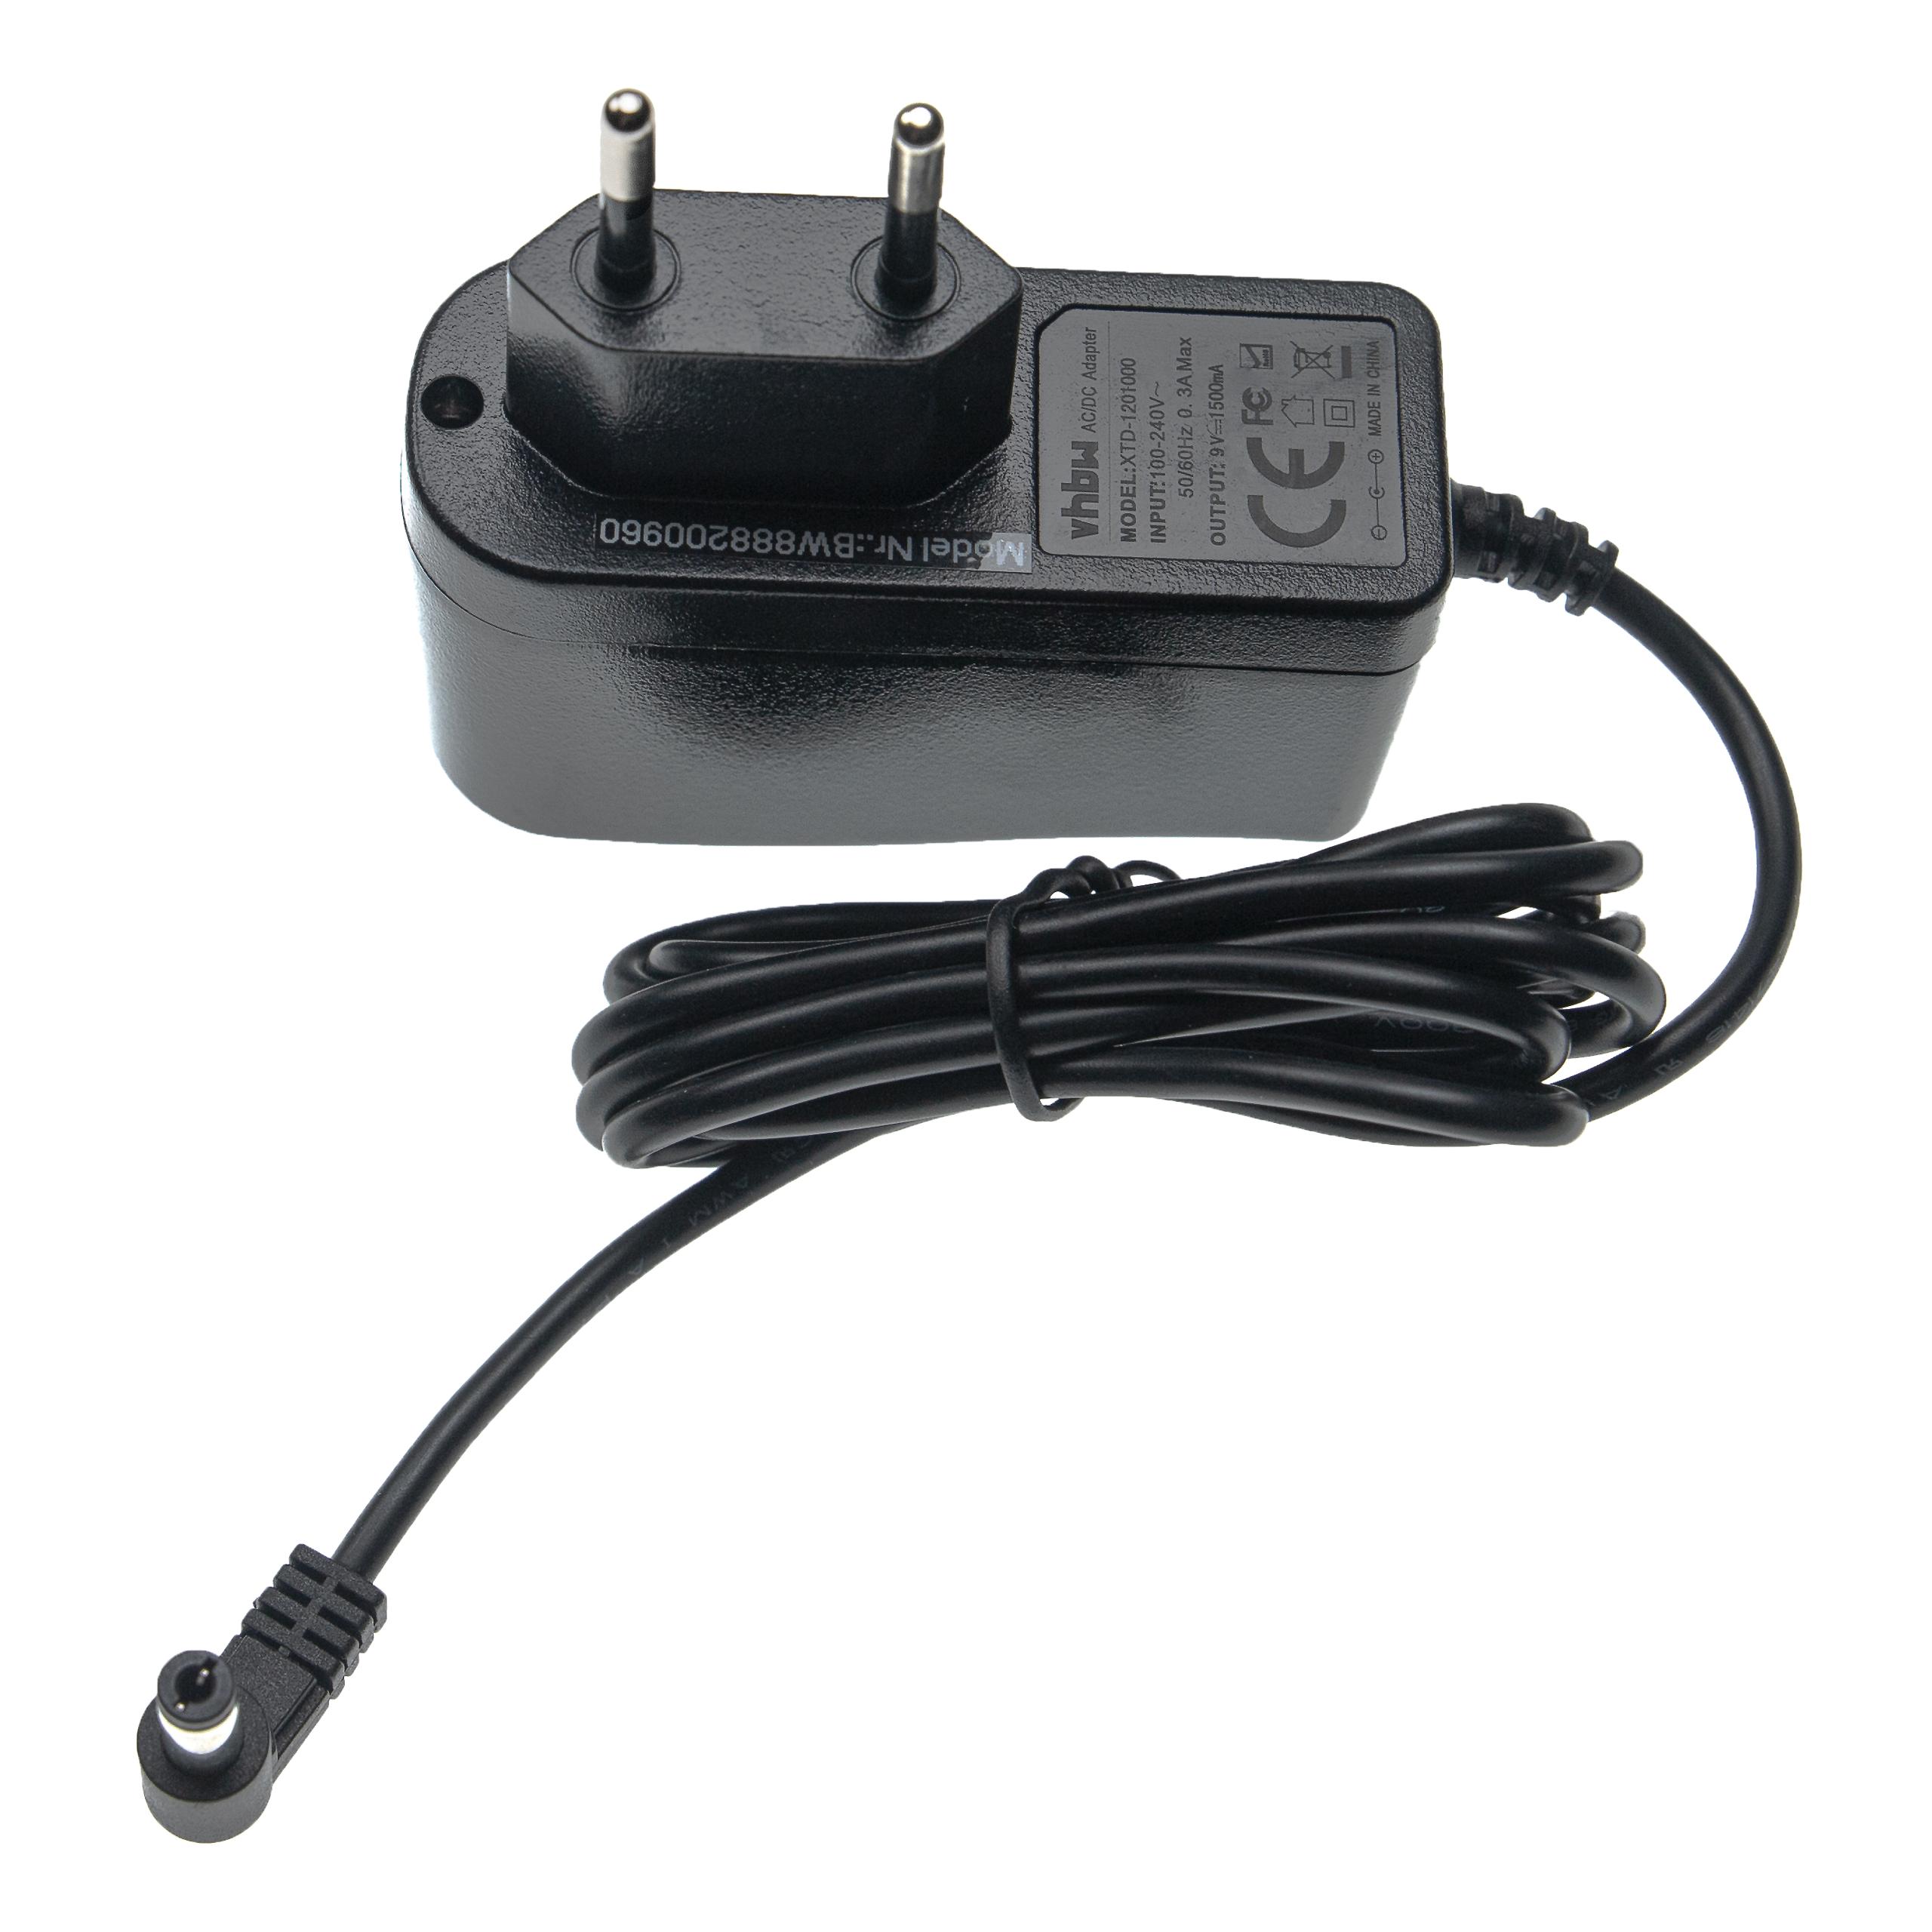 Mains Power Adapter suitable for tonies, Arduino Audio Box etc., 150 cm, 9 V, 1.5 A